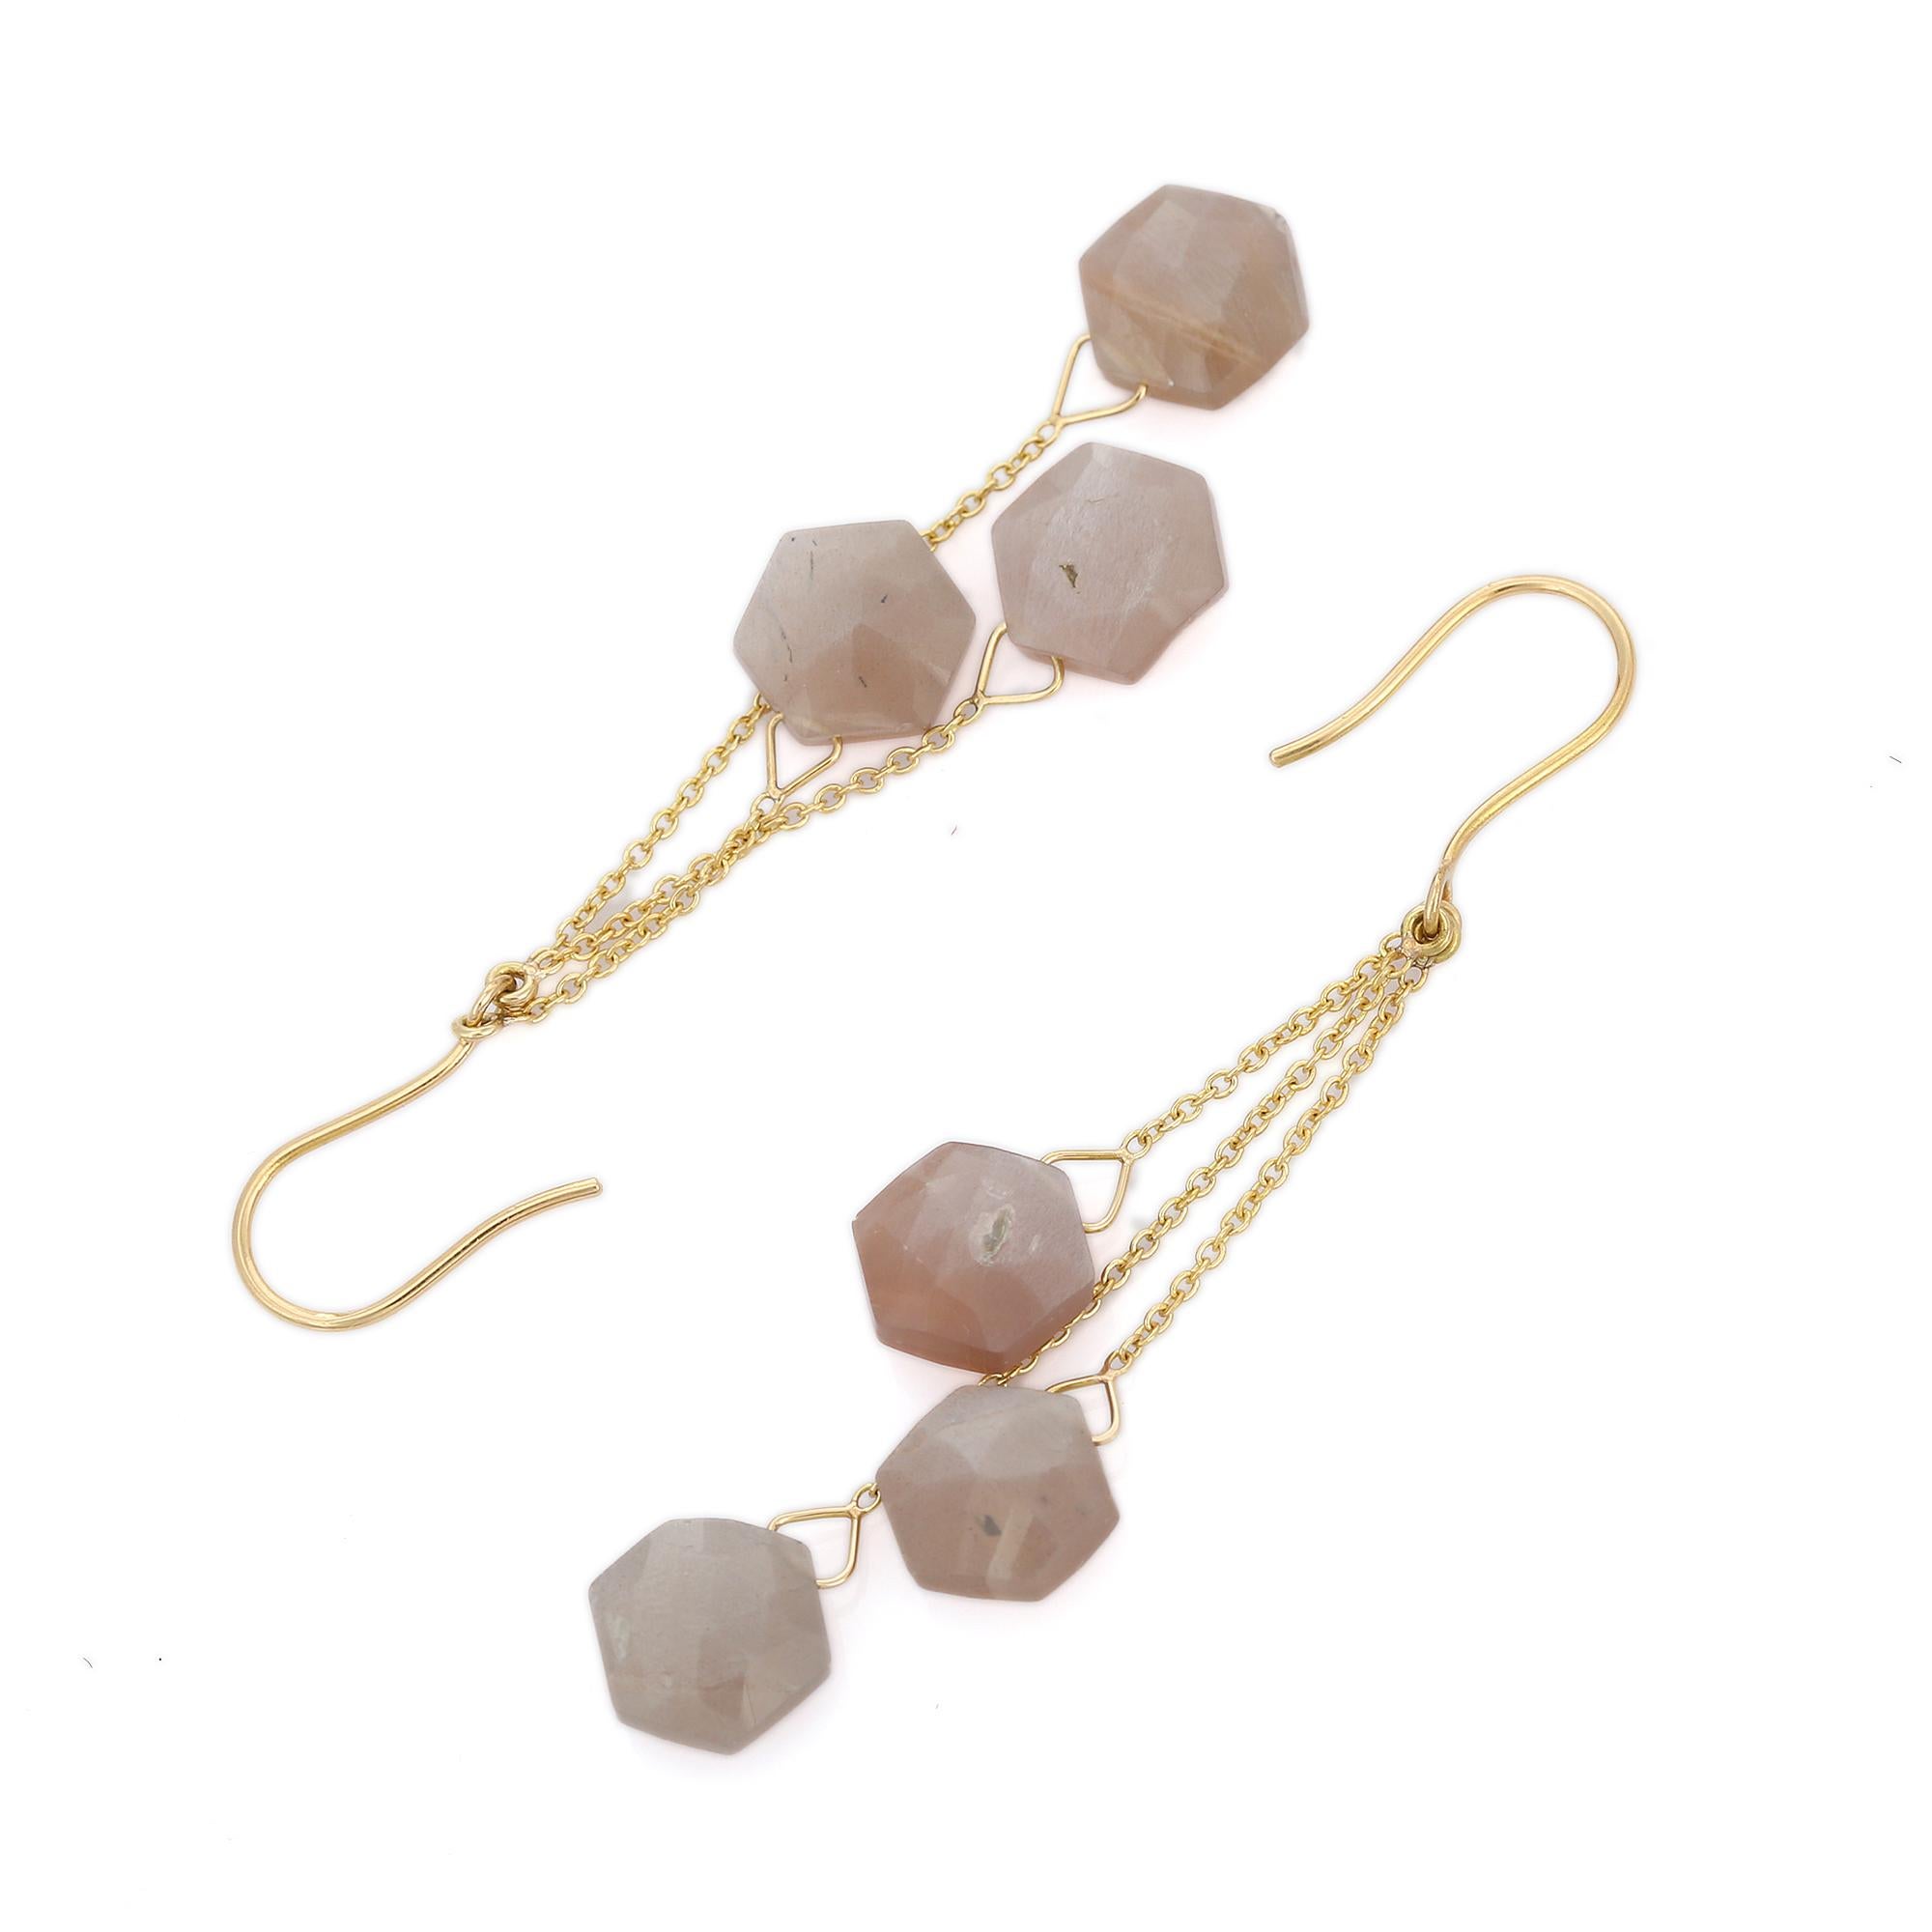 Moonstone Dangle earrings to make a statement with your look. These earrings create a sparkling, luxurious look featuring hexagon cut gemstone.
If you love to gravitate towards unique styles, this piece of jewelry is perfect for you.

PRODUCT